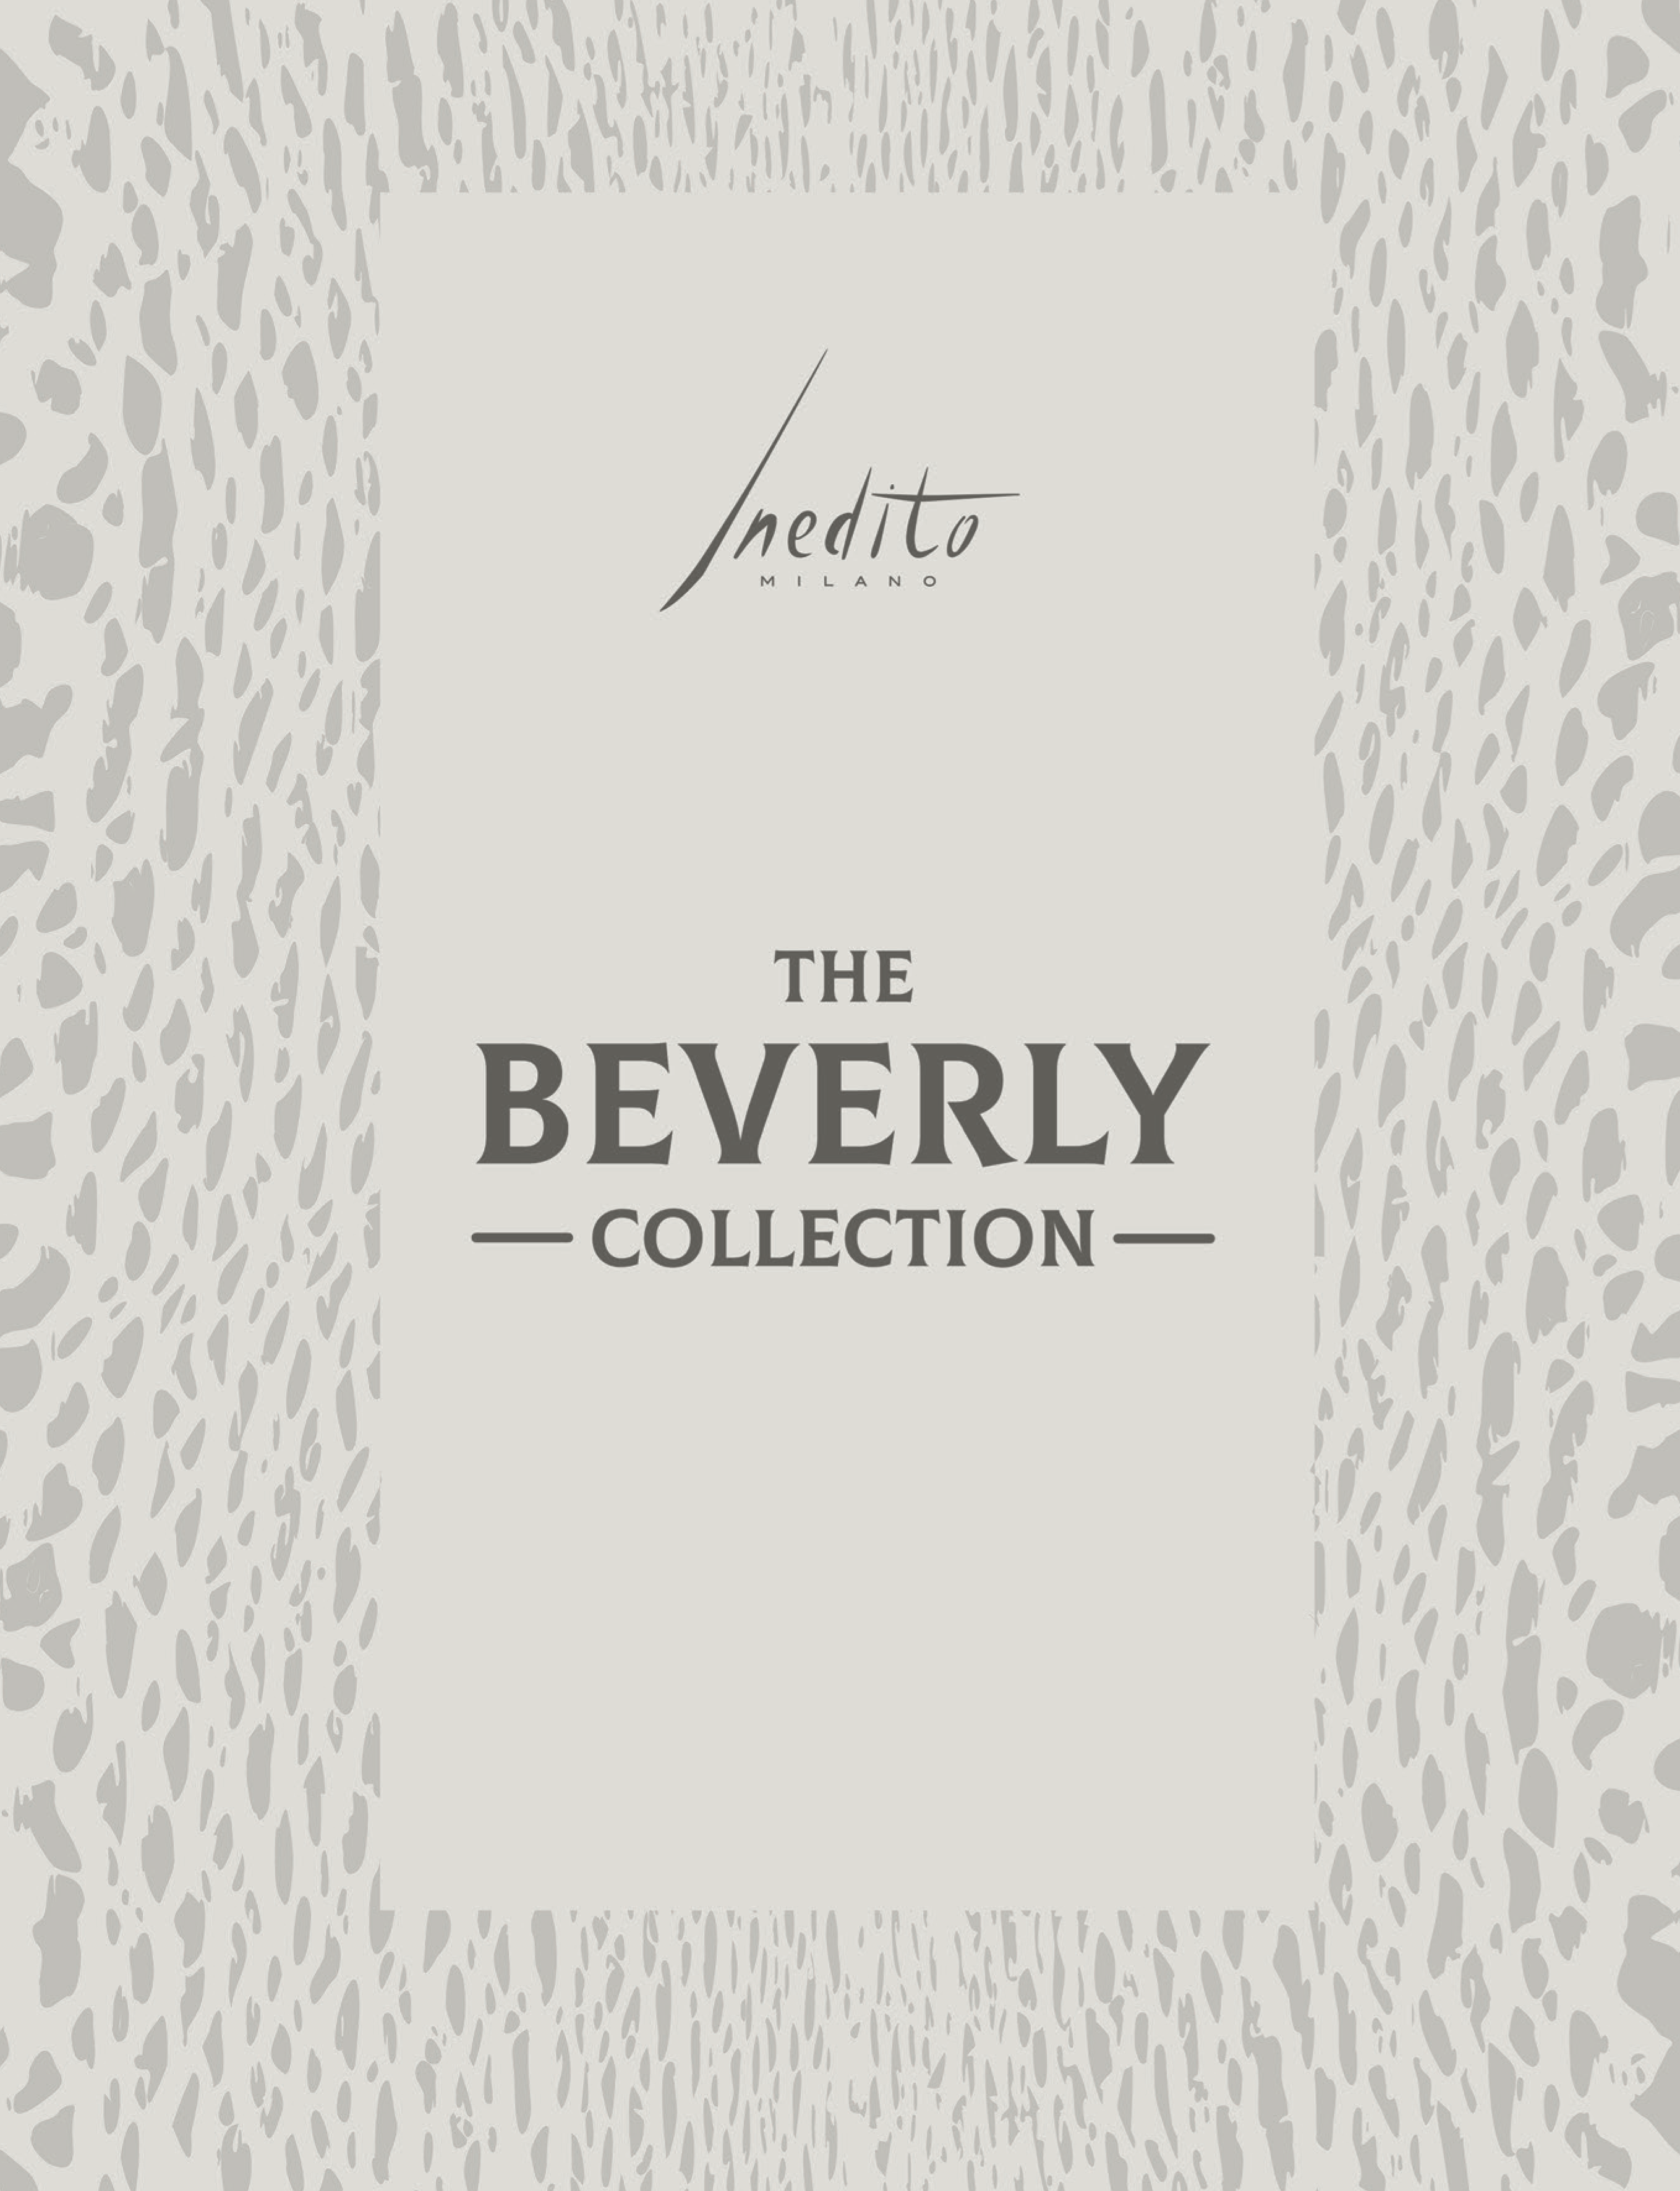 THE BEVERLY COLLECTION